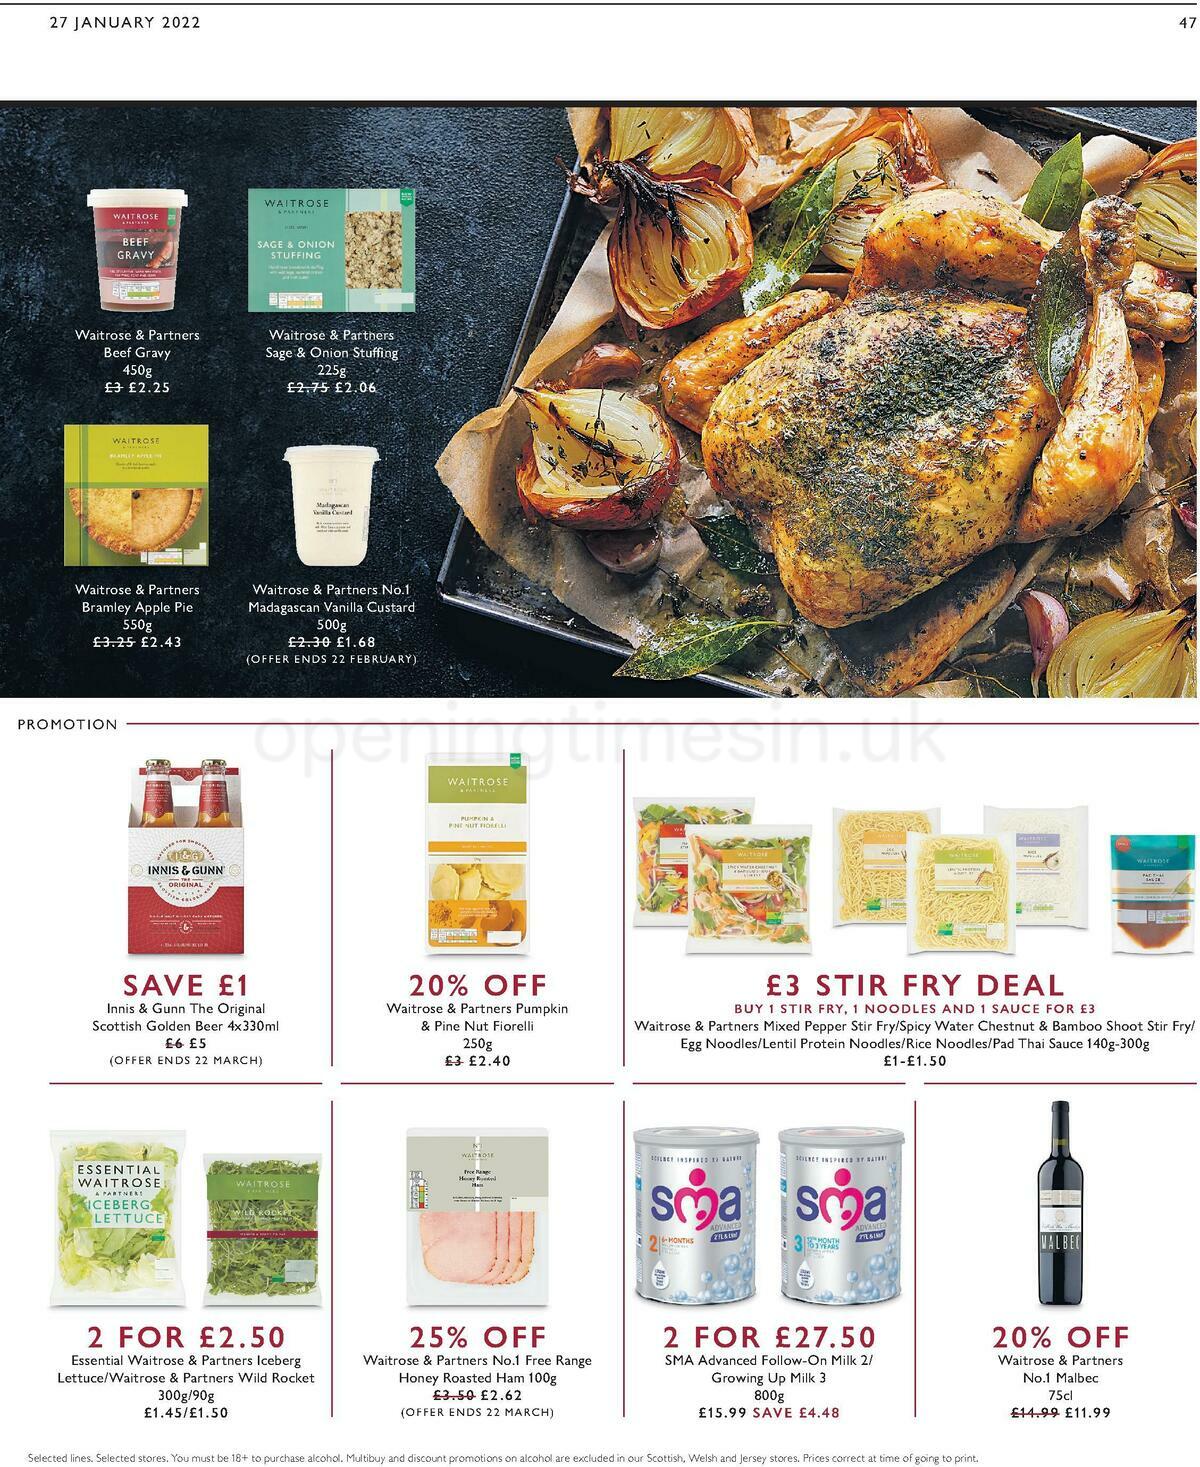 Waitrose Offers from 27 January